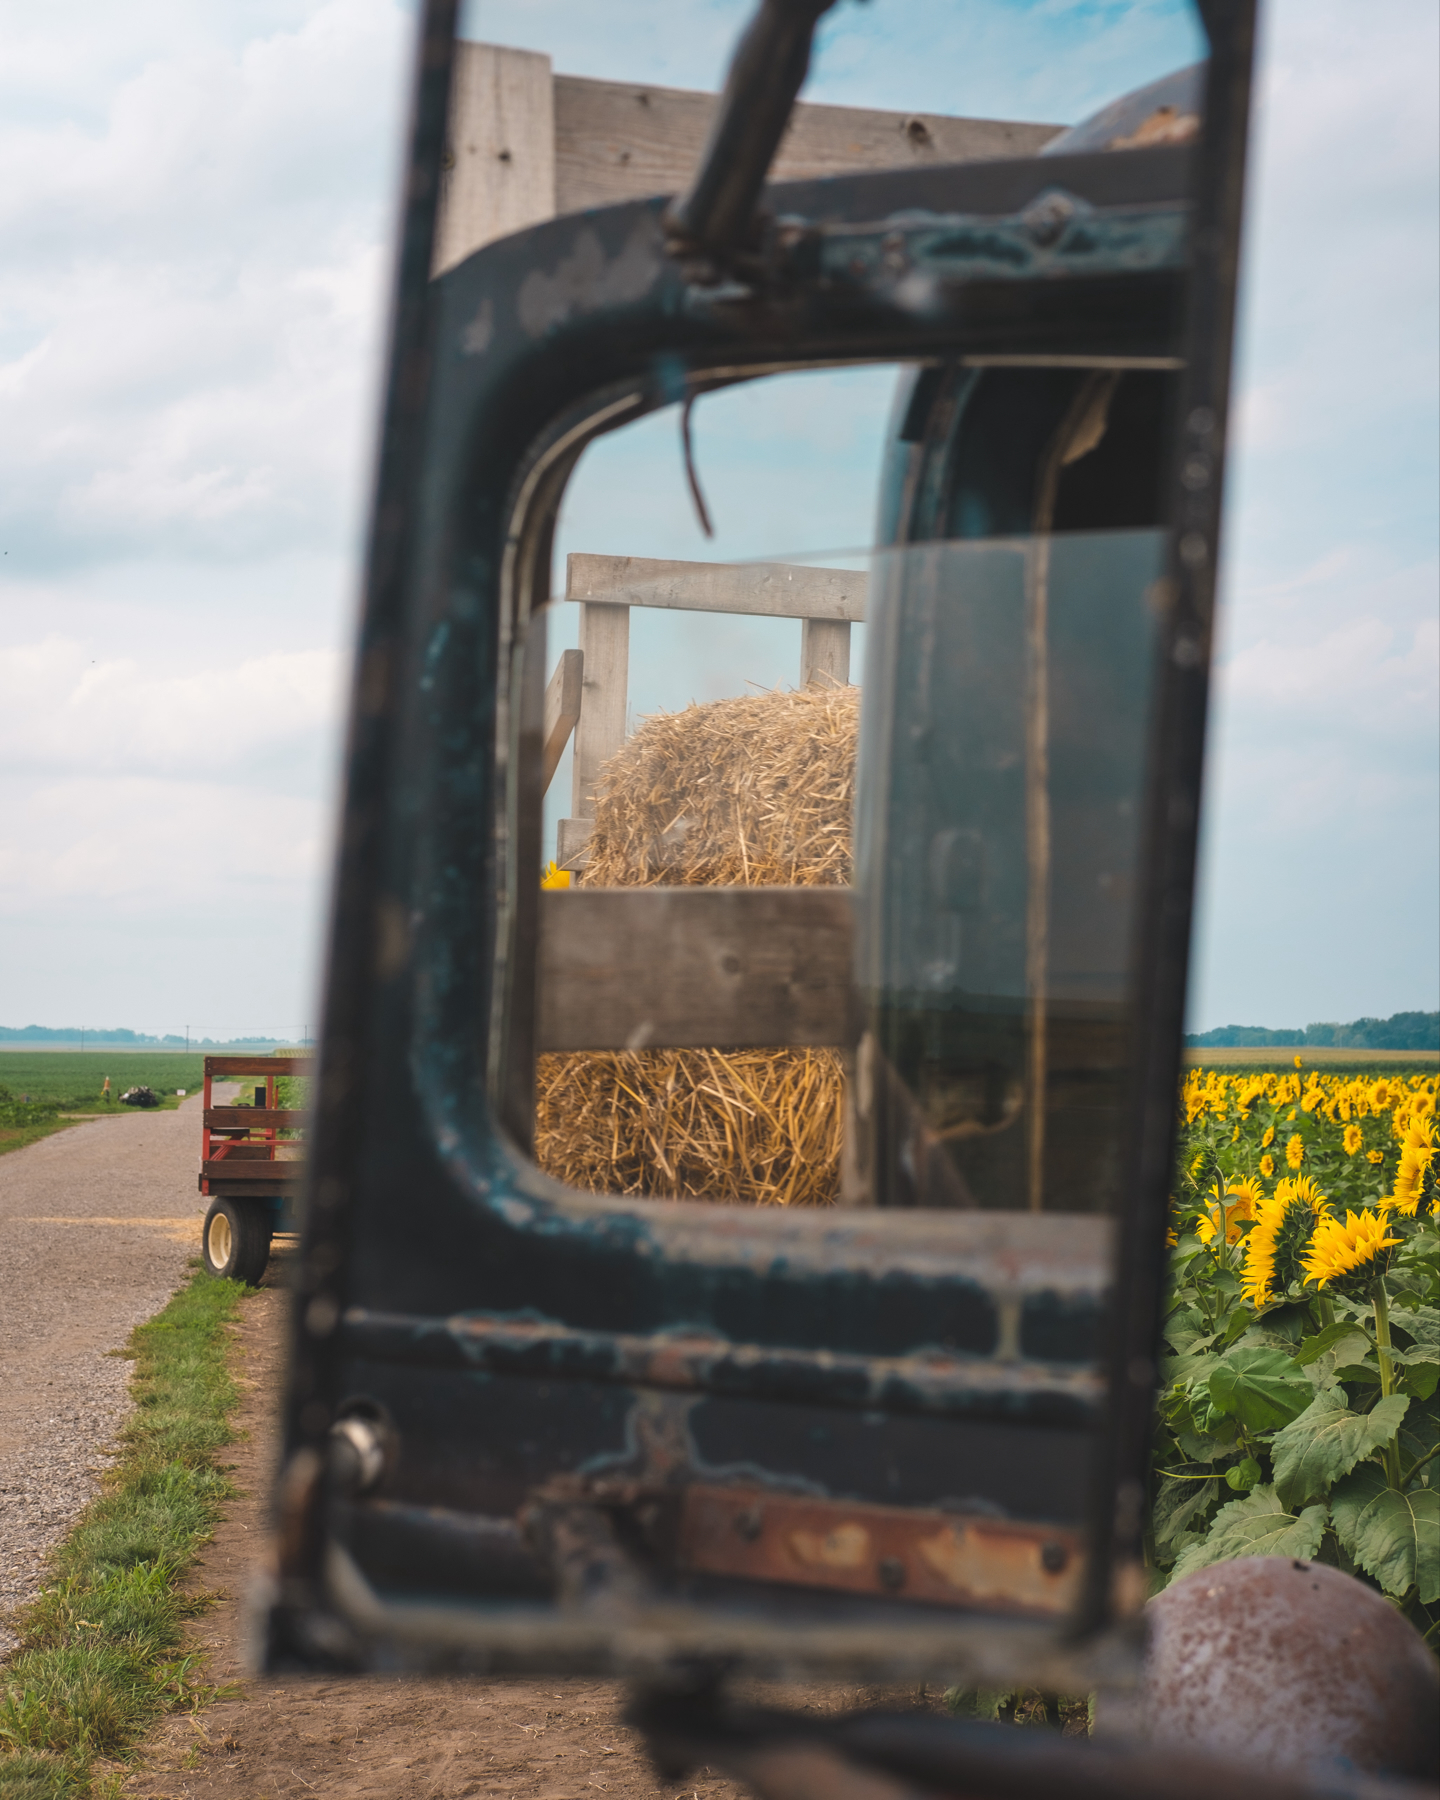 A rustic scene framed through the mirror of an old tractor cab, showing a hay bale on a trailer with a sunflower field in the background.